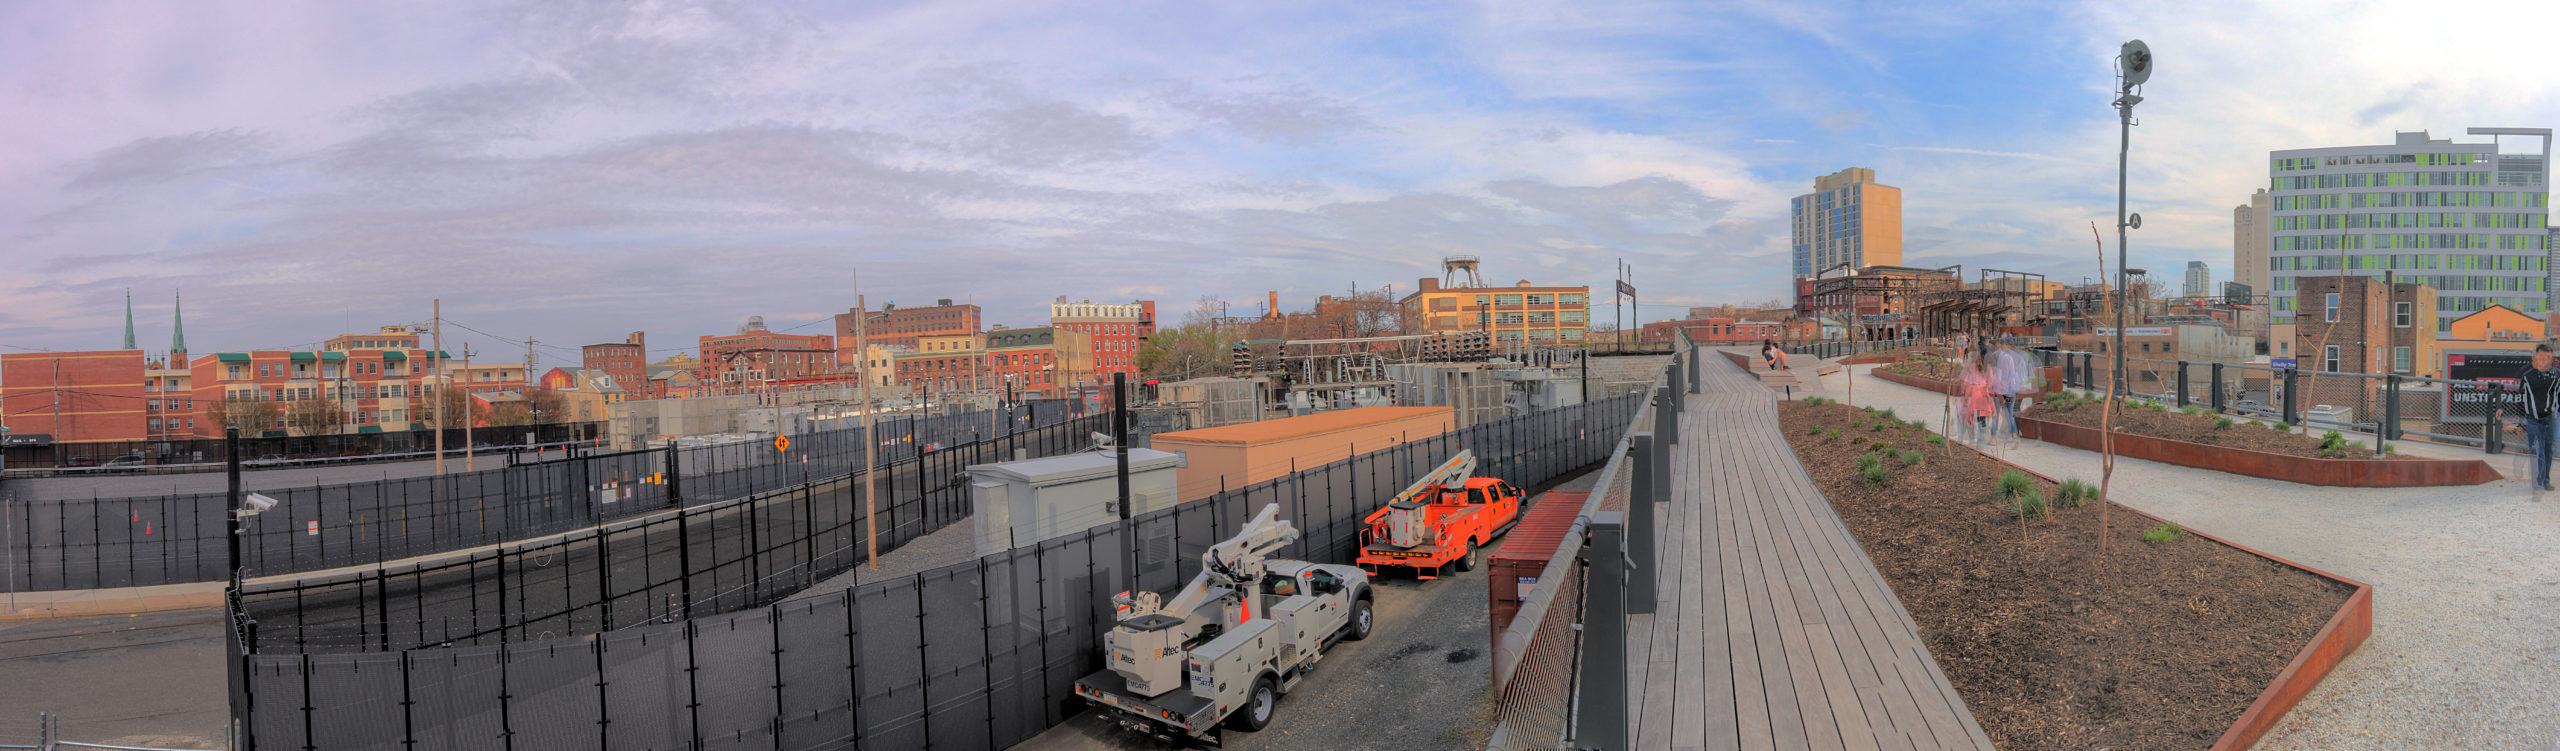 View from the Rail Park, over 12th Street Callowhill District Philadelphia, PA Copyright 2019, Bob Bruhin. All rights reserved.